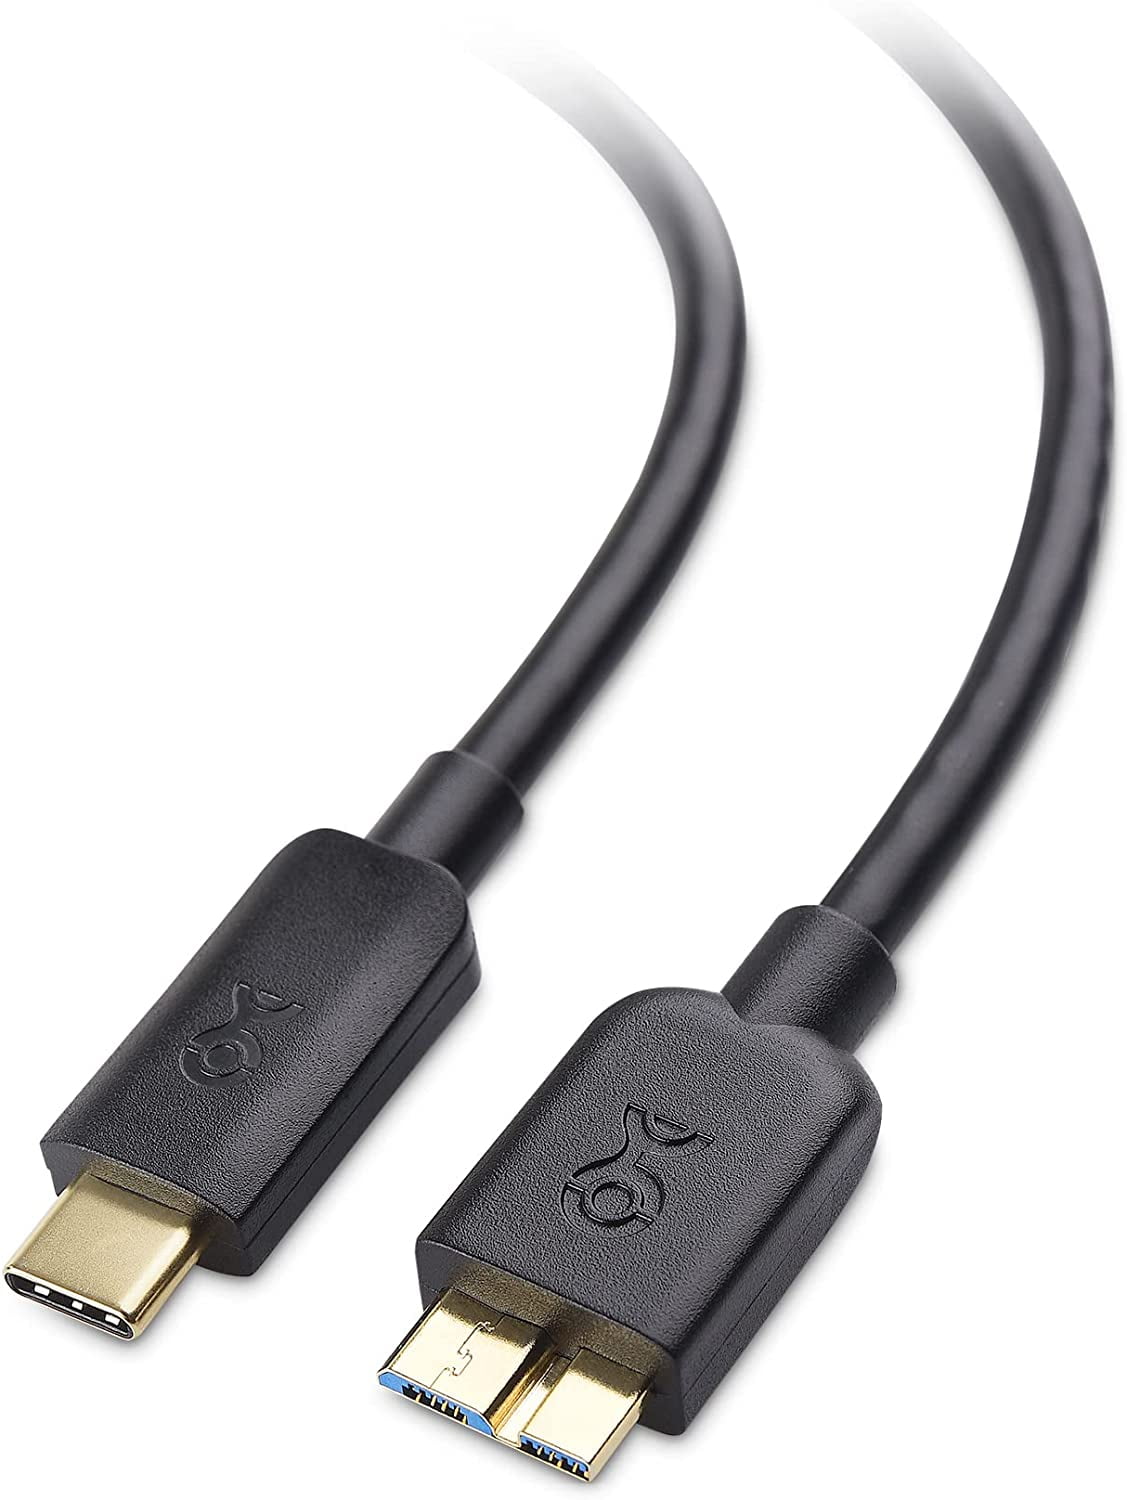 Ligegyldighed Modstand Prædike Cable Matters USB C to Micro USB 3.0 Cable (USB C to Micro B 3.0, USB C  Hard Drive Cable) in Black 3.3 Feet - Walmart.com